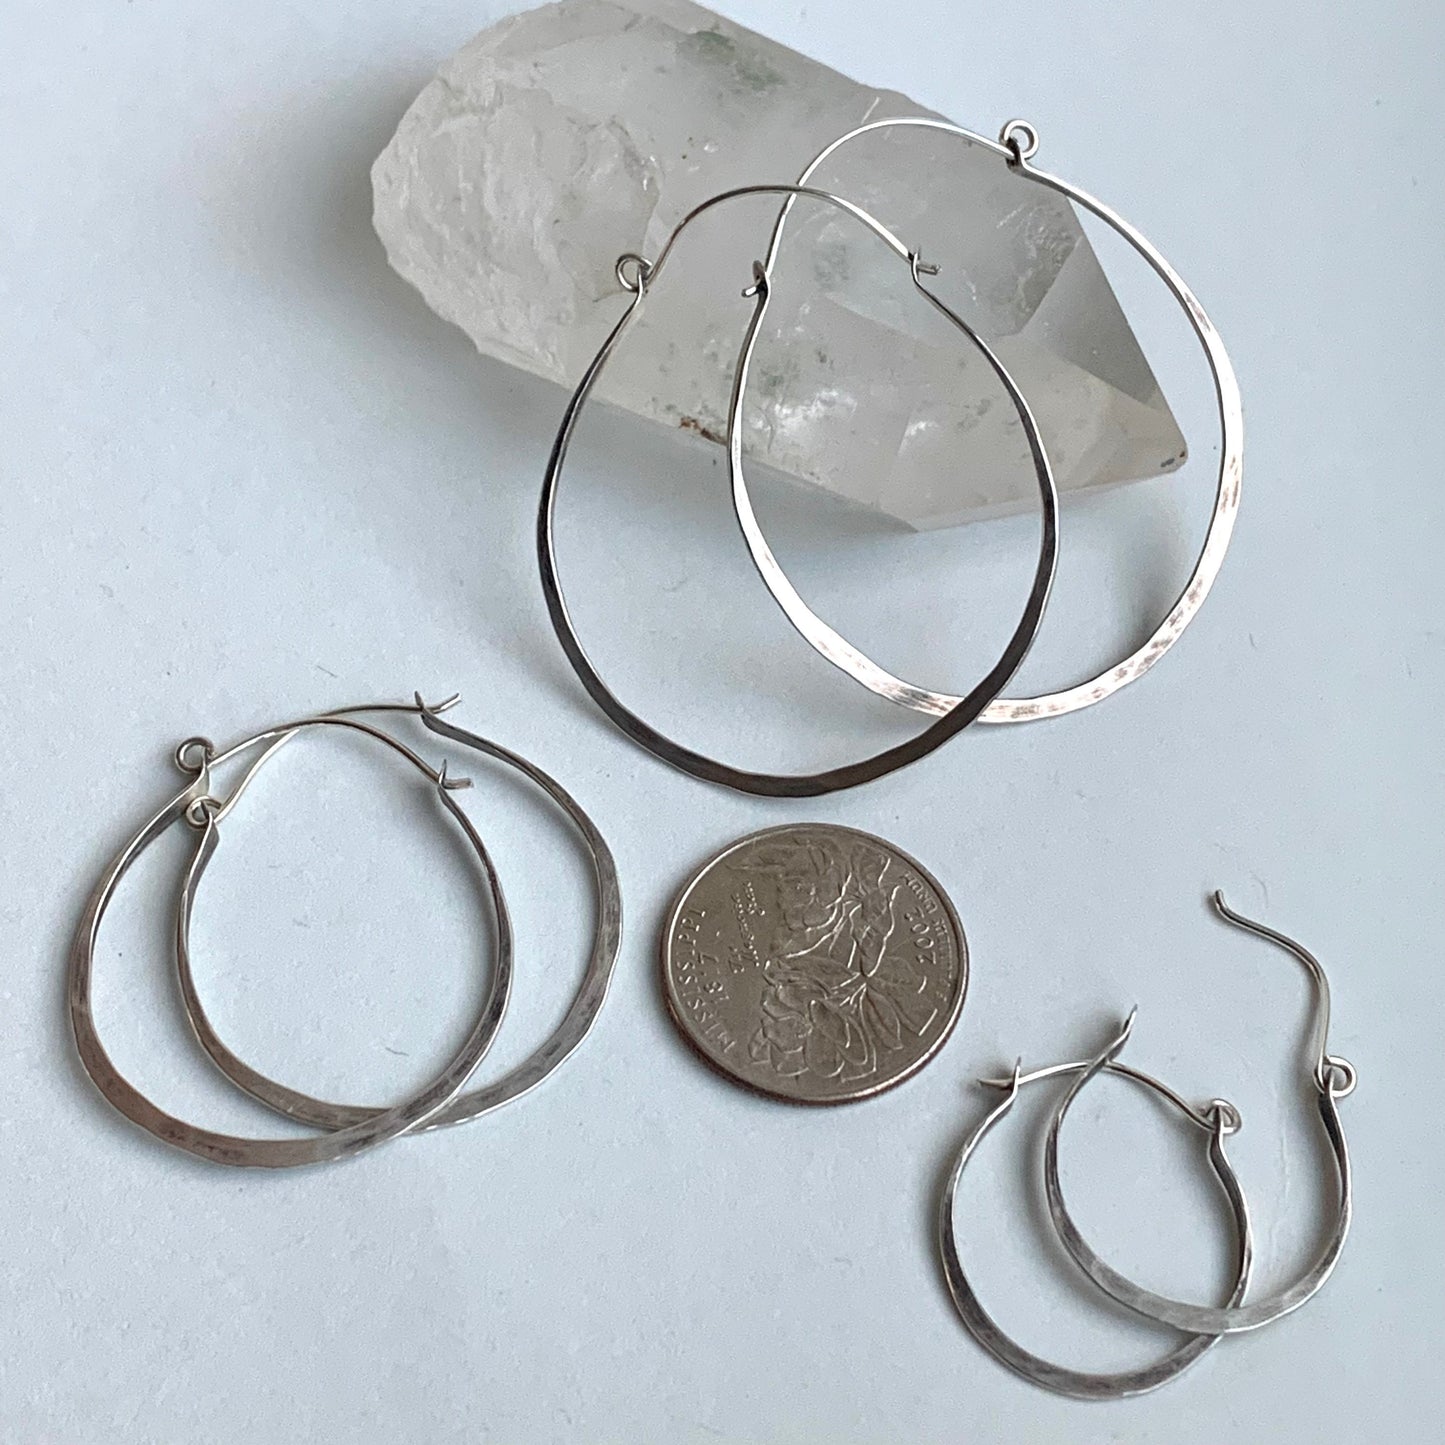 Silver hoop earrings - small, medium or large hoops - lightweight sterling hoops - hand forged wire - gifts for moms - boho - yoga lifestyle